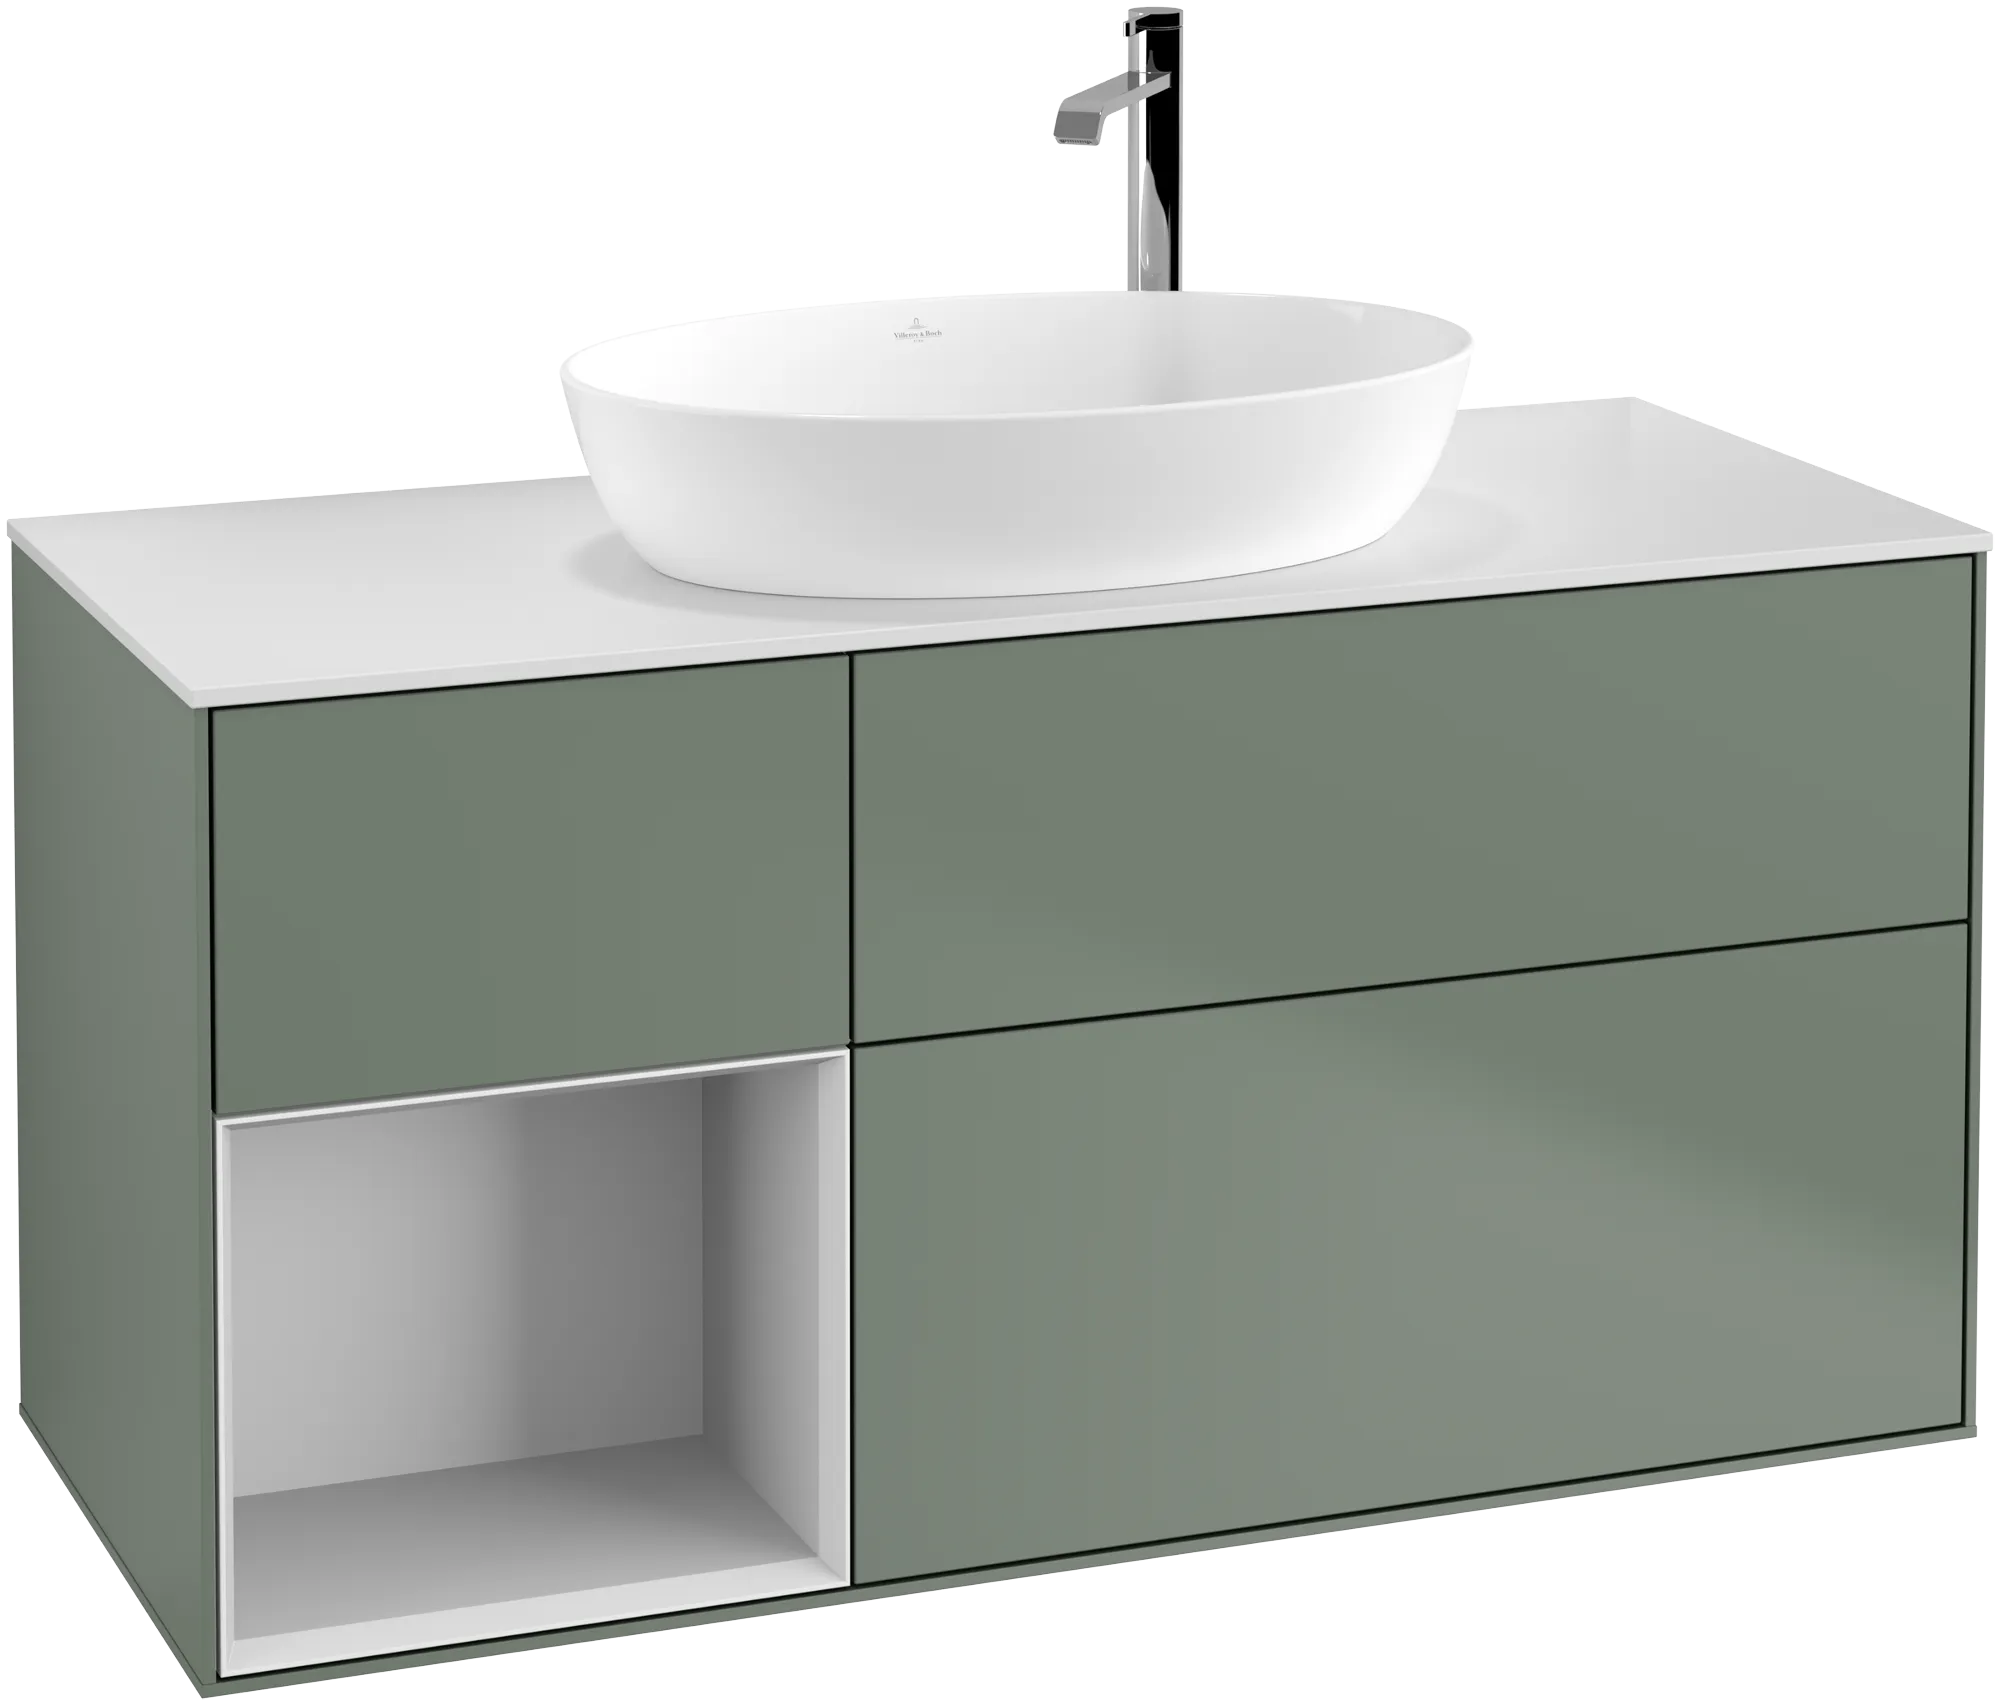 Picture of VILLEROY BOCH Finion Vanity unit, with lighting, 3 pull-out compartments, 1200 x 603 x 501 mm, Olive Matt Lacquer / White Matt Lacquer / Glass White Matt #G941MTGM